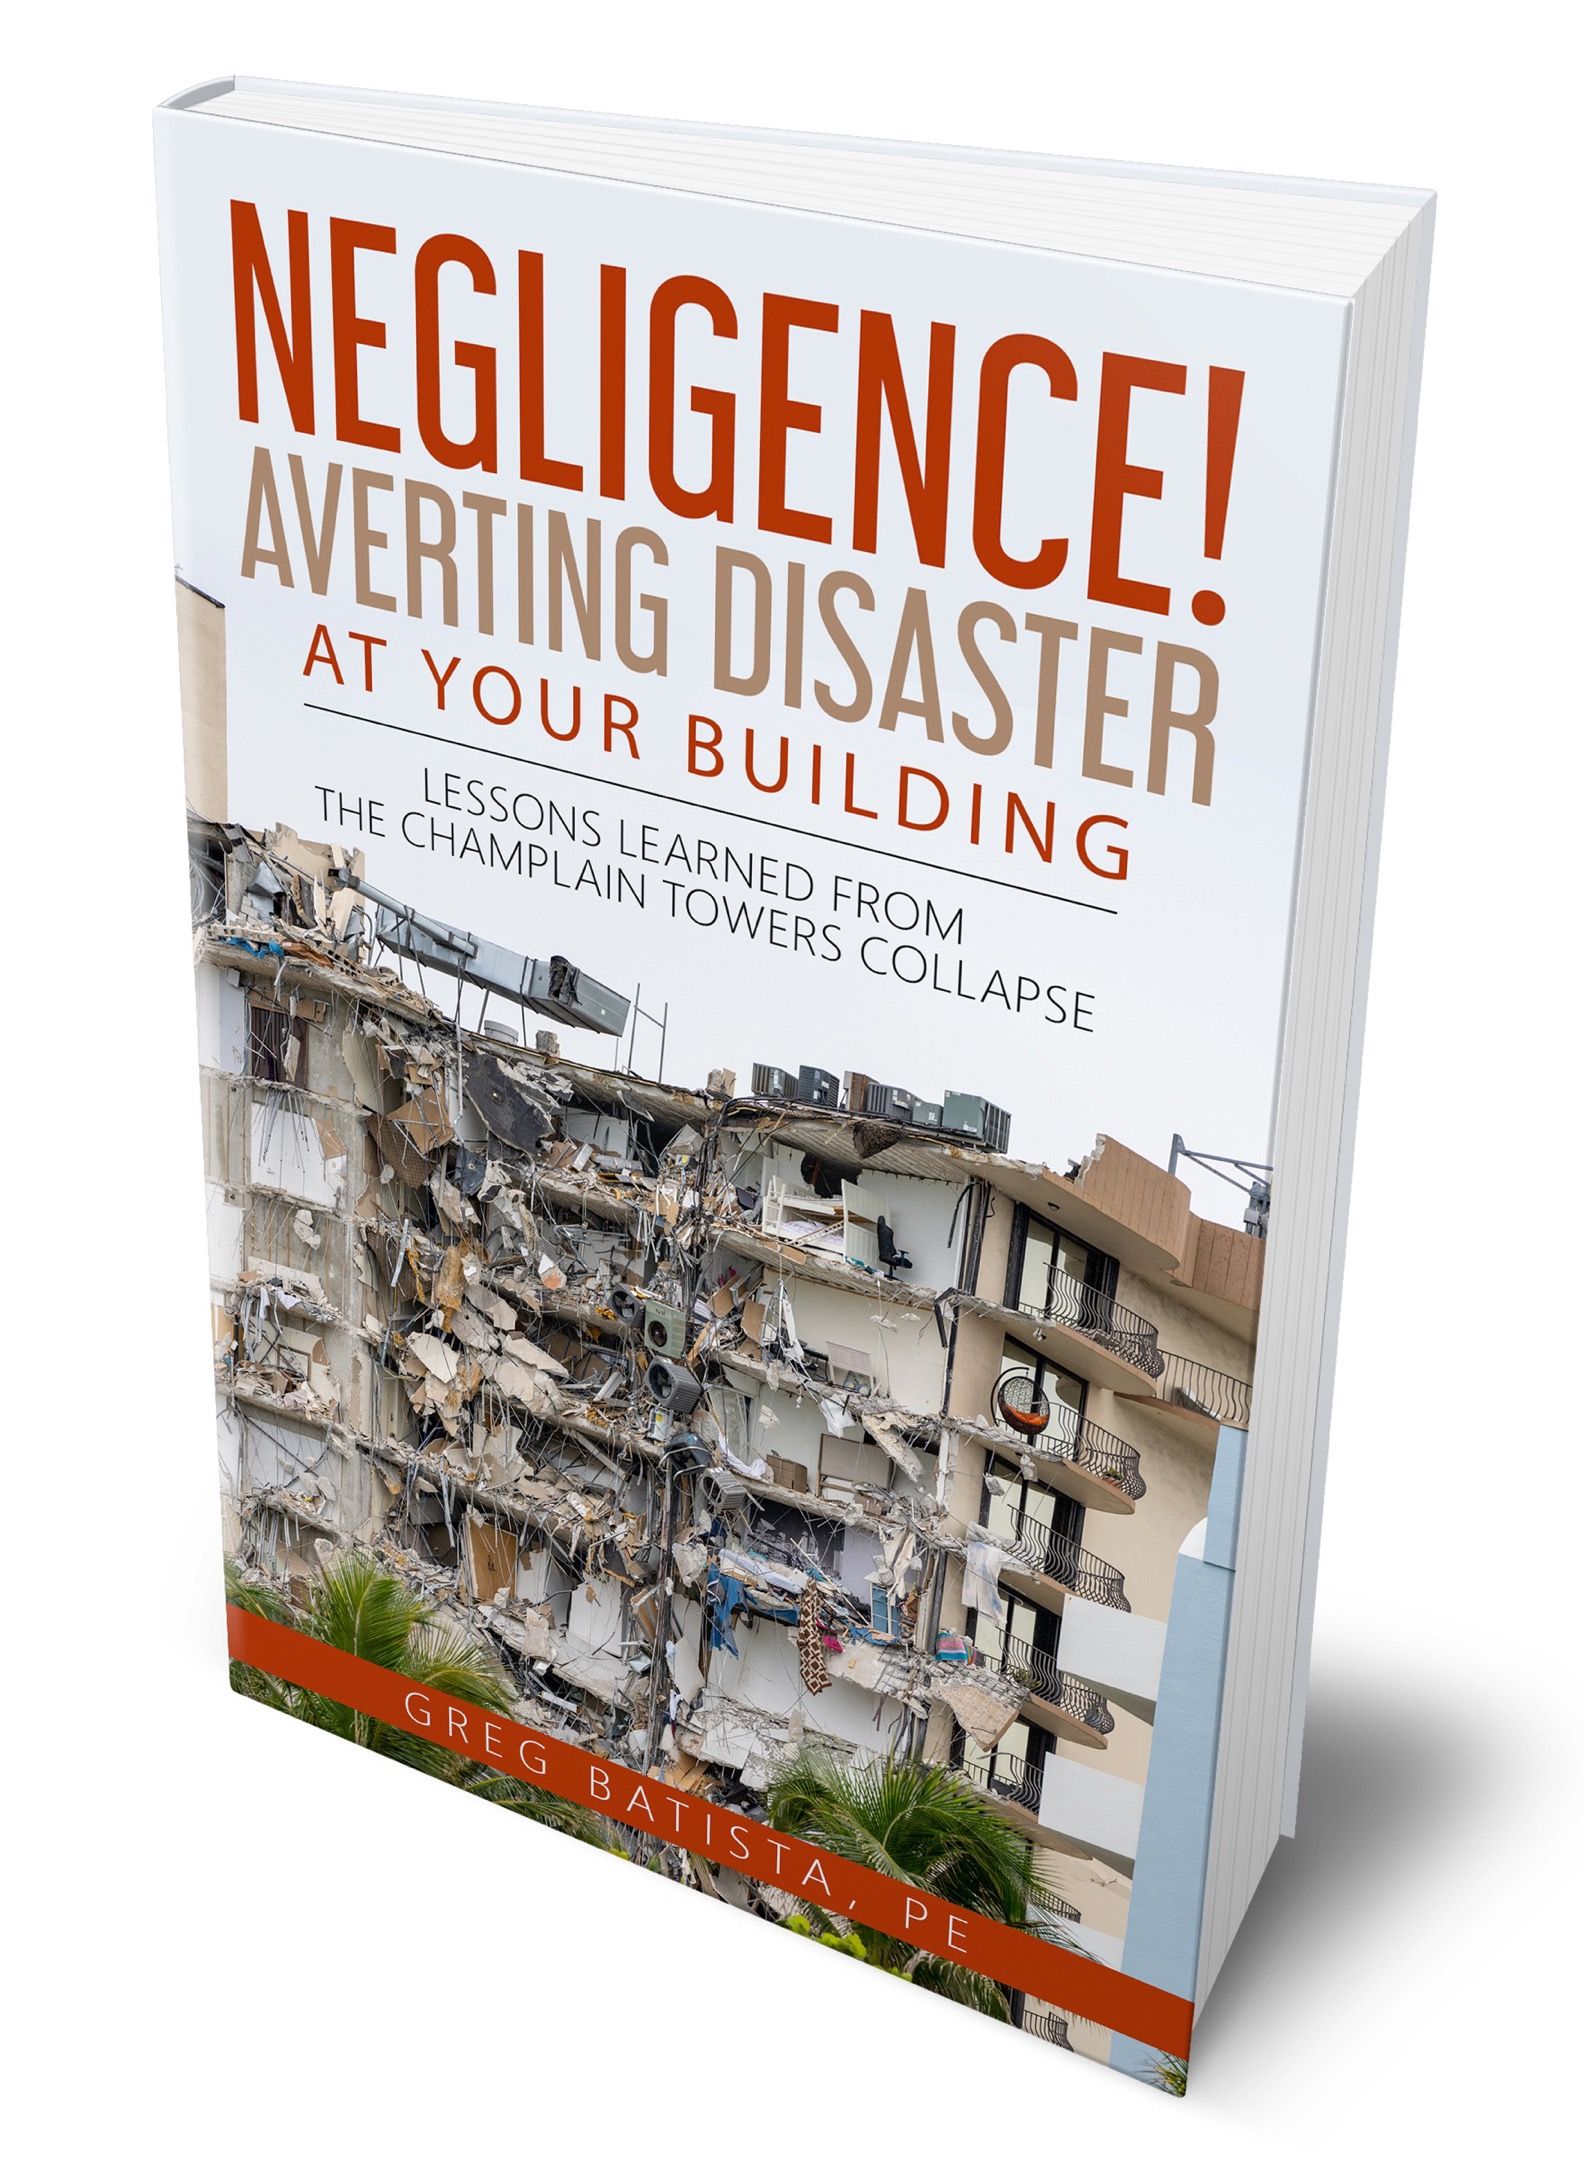 Surfside tower collapse examined in new book